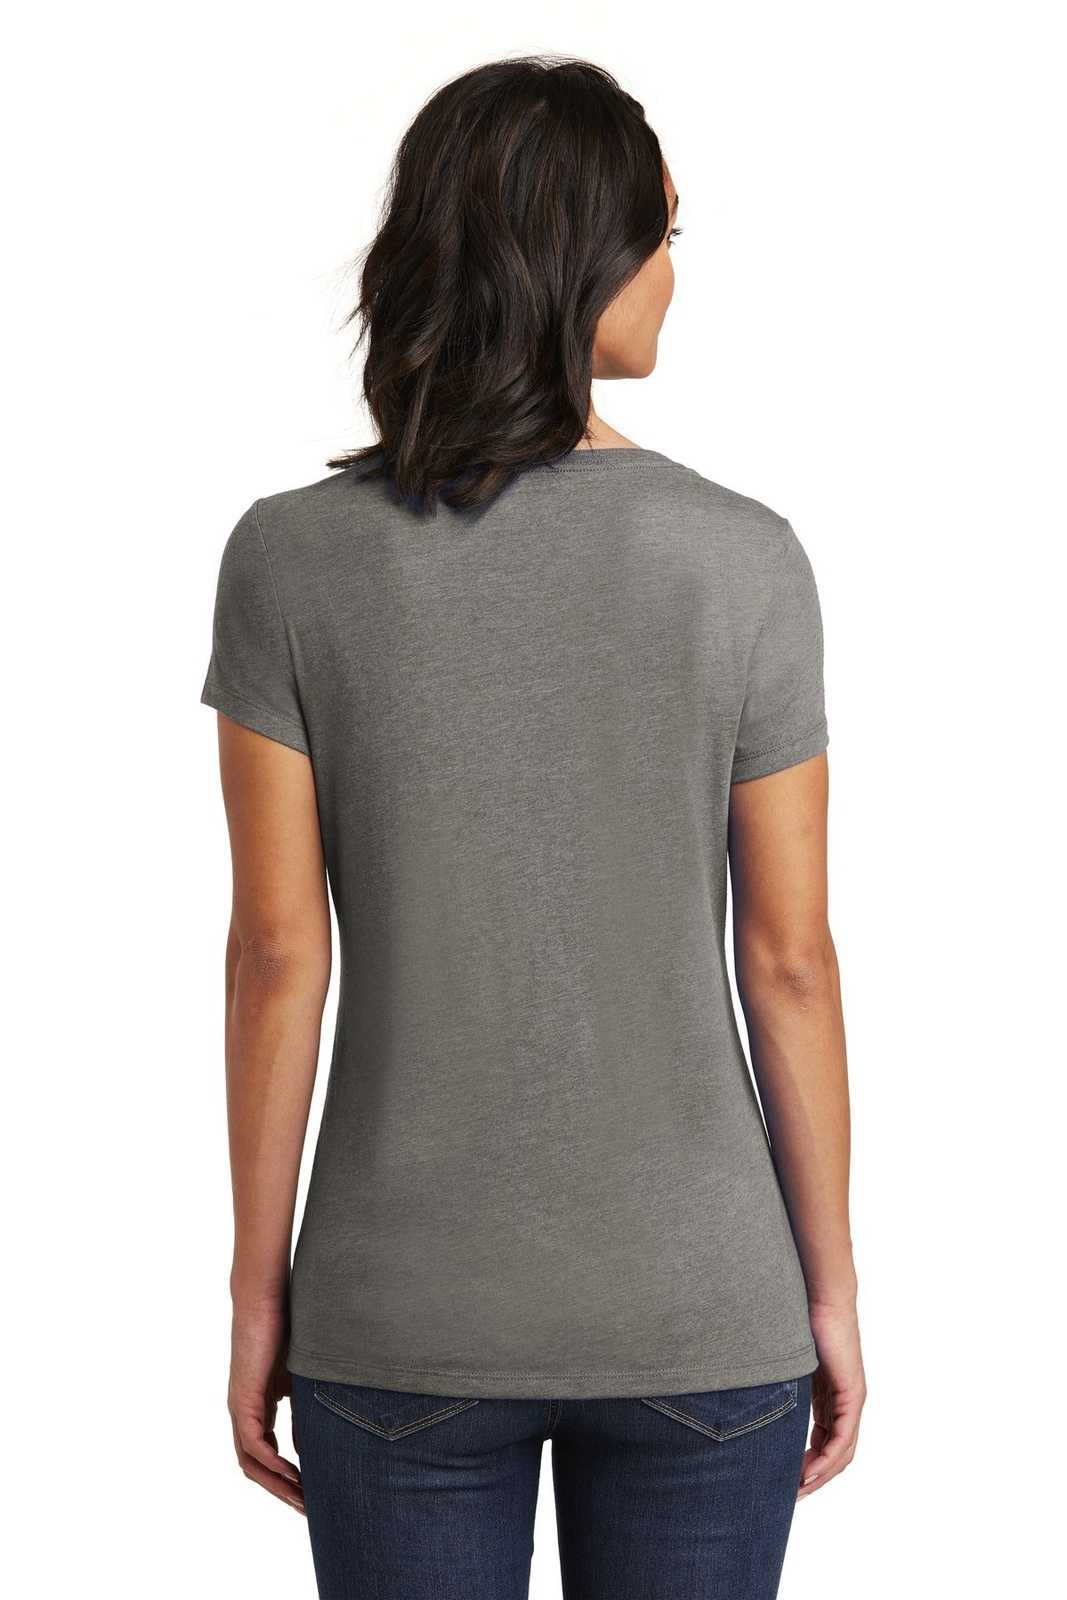 District DT6503 Women's Very Important Tee V-Neck - Gray Frost - HIT a Double - 1